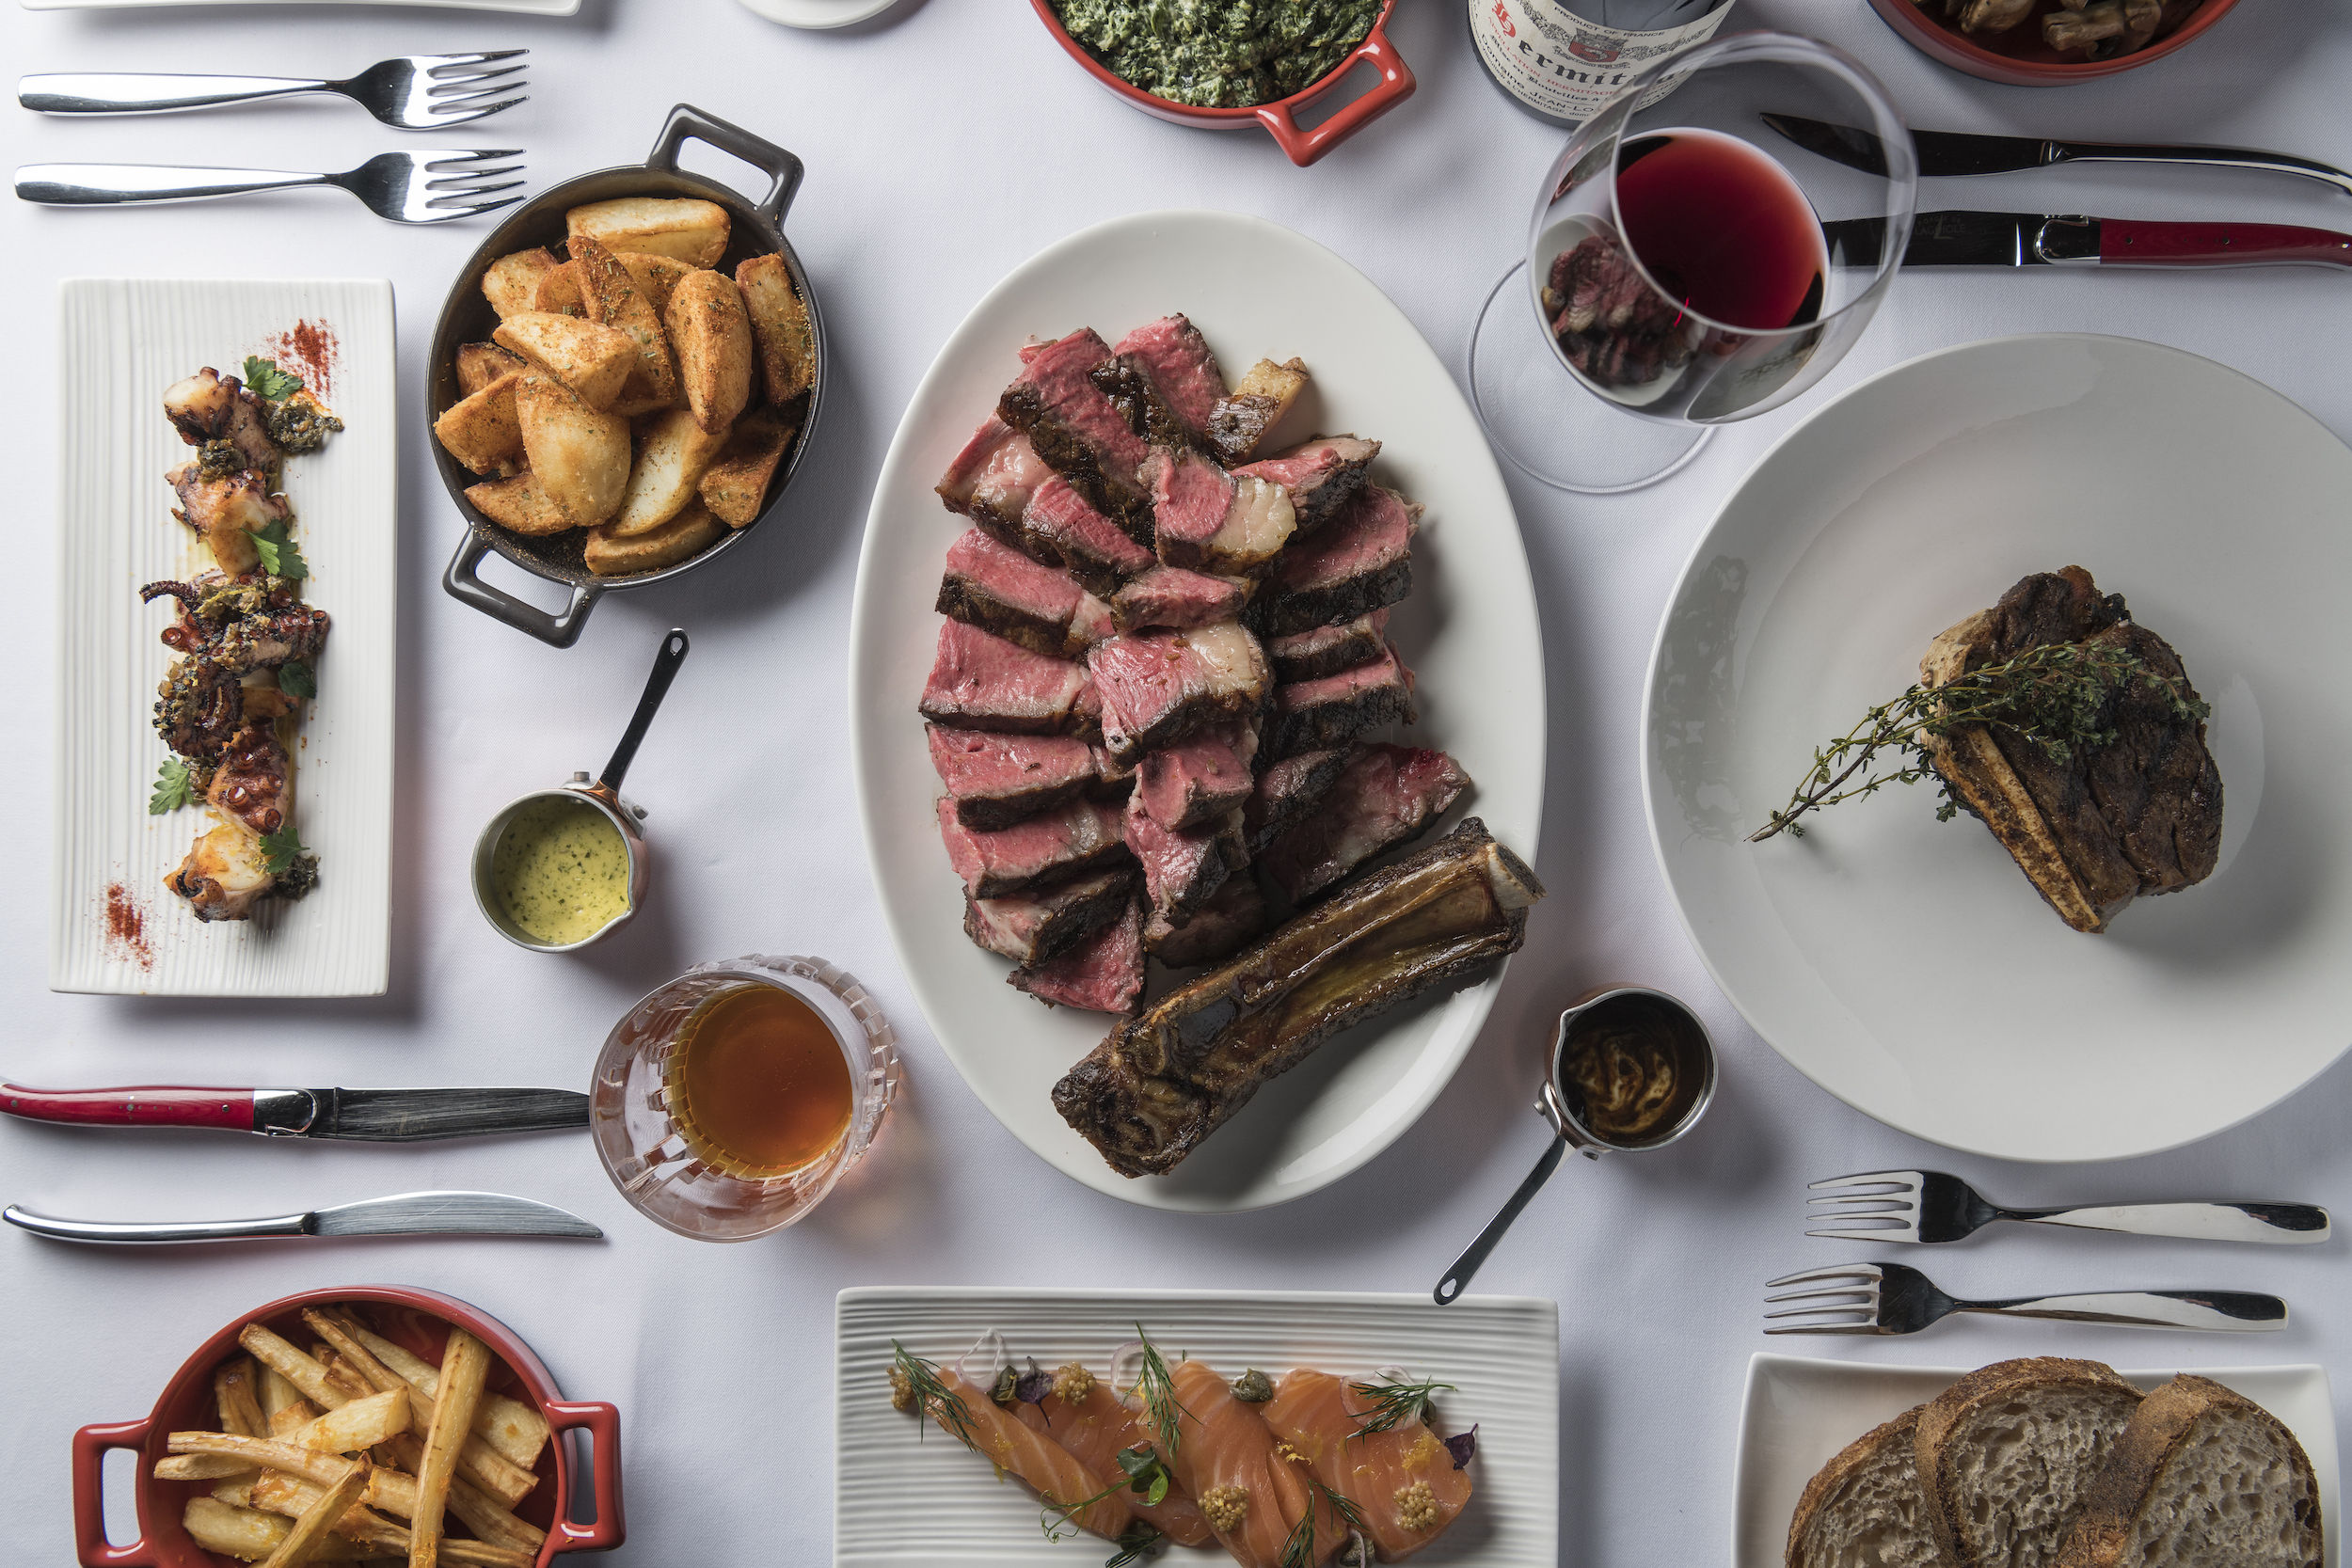 Steak on Elgin is the newest meat lover’s den to hit SoHo